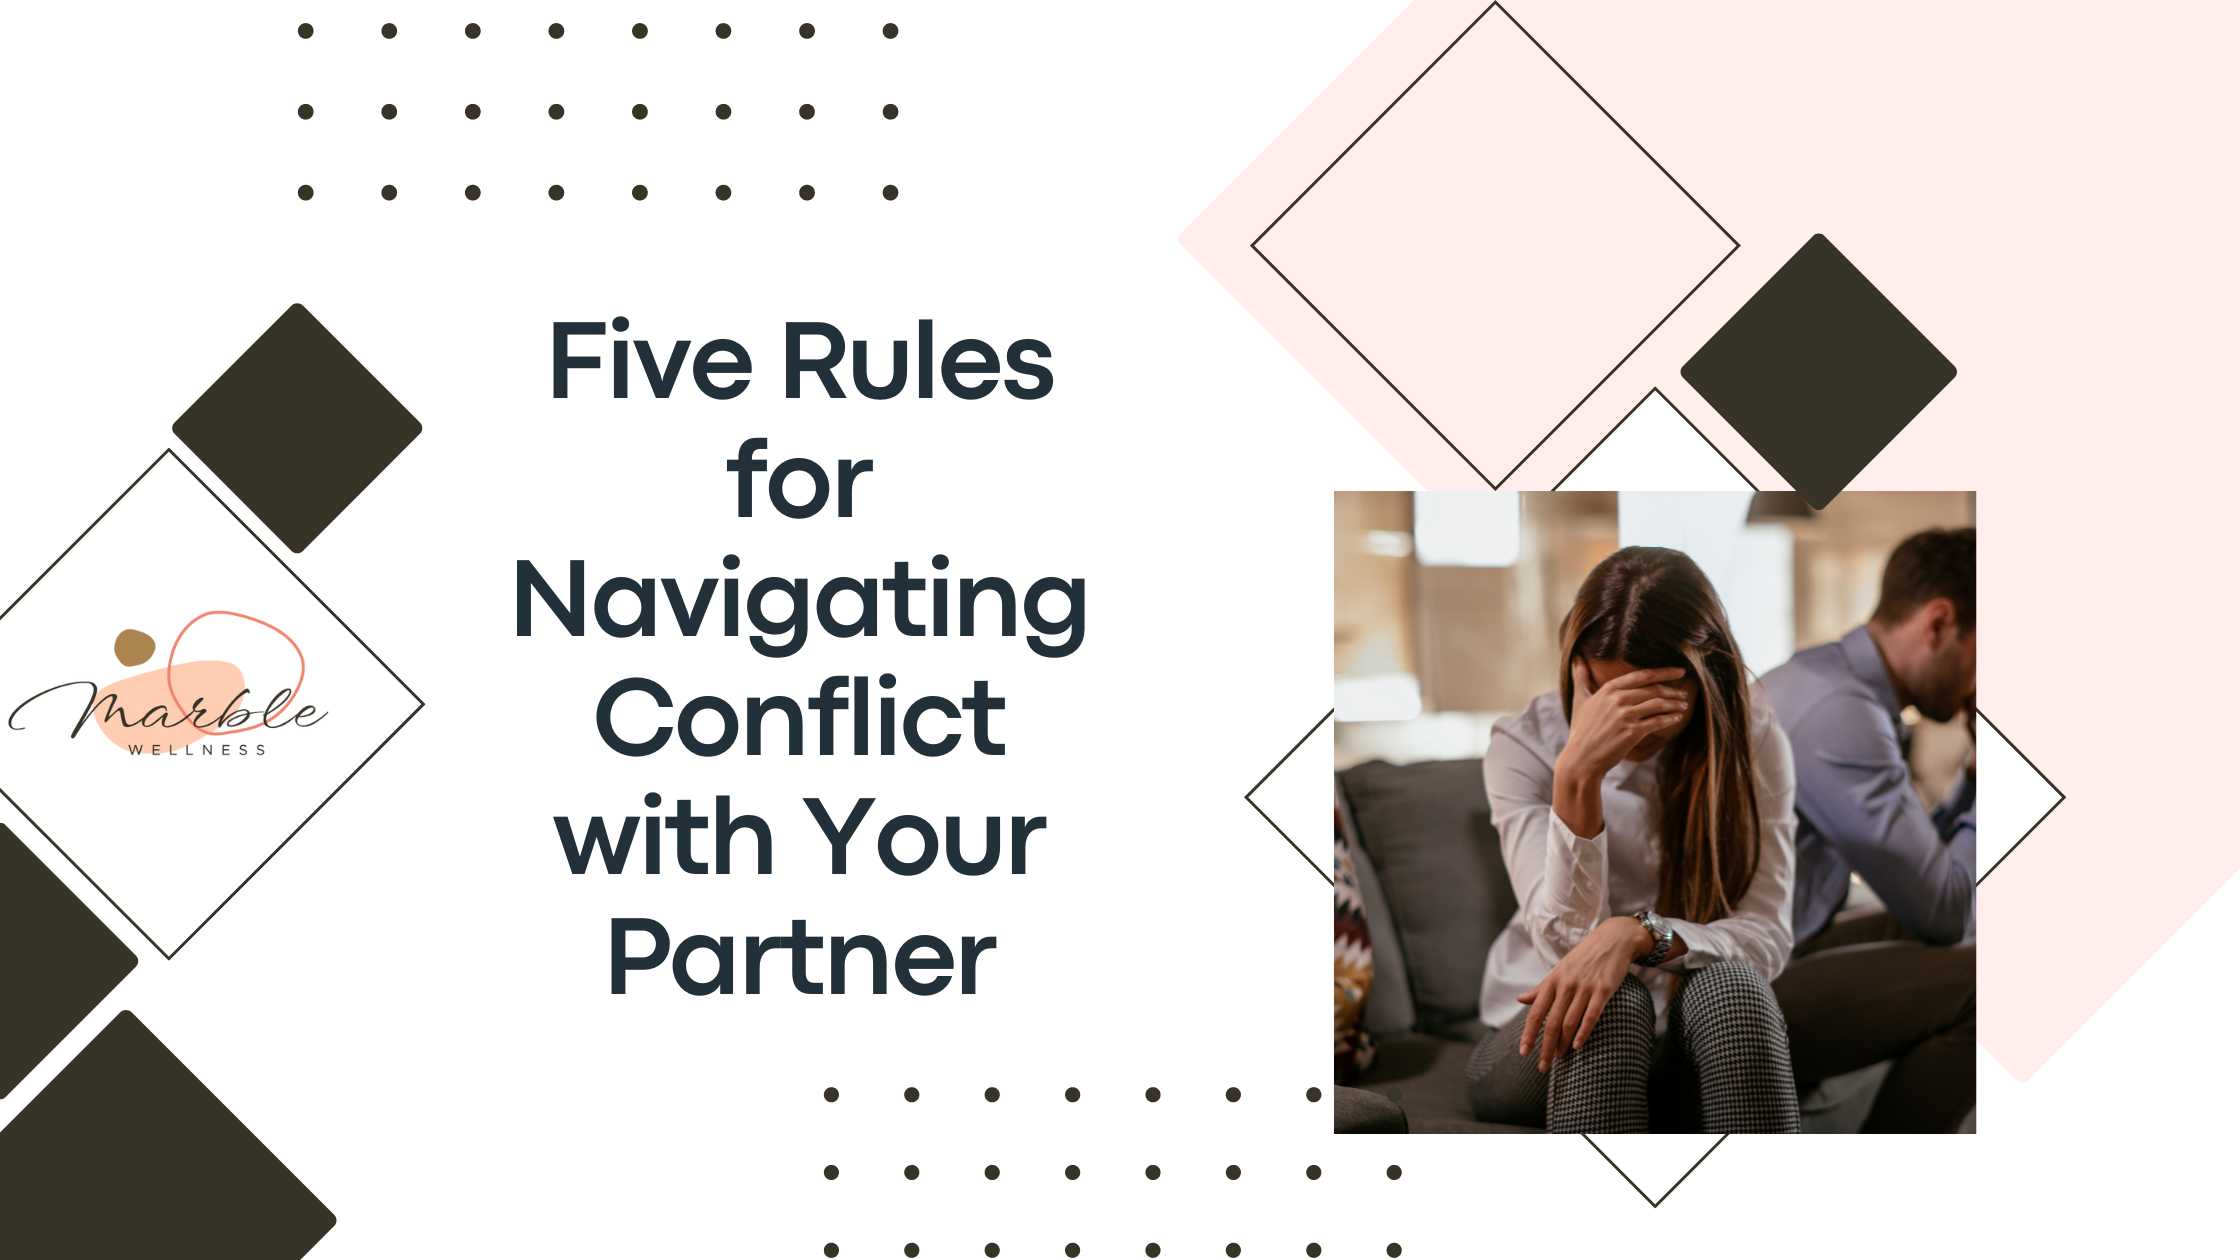 Blog post cover photo for "Five Rules for Navigating Conflict with Your Partner" couples therapy and marriage counseling concepts from a West County, MO couples therapist.